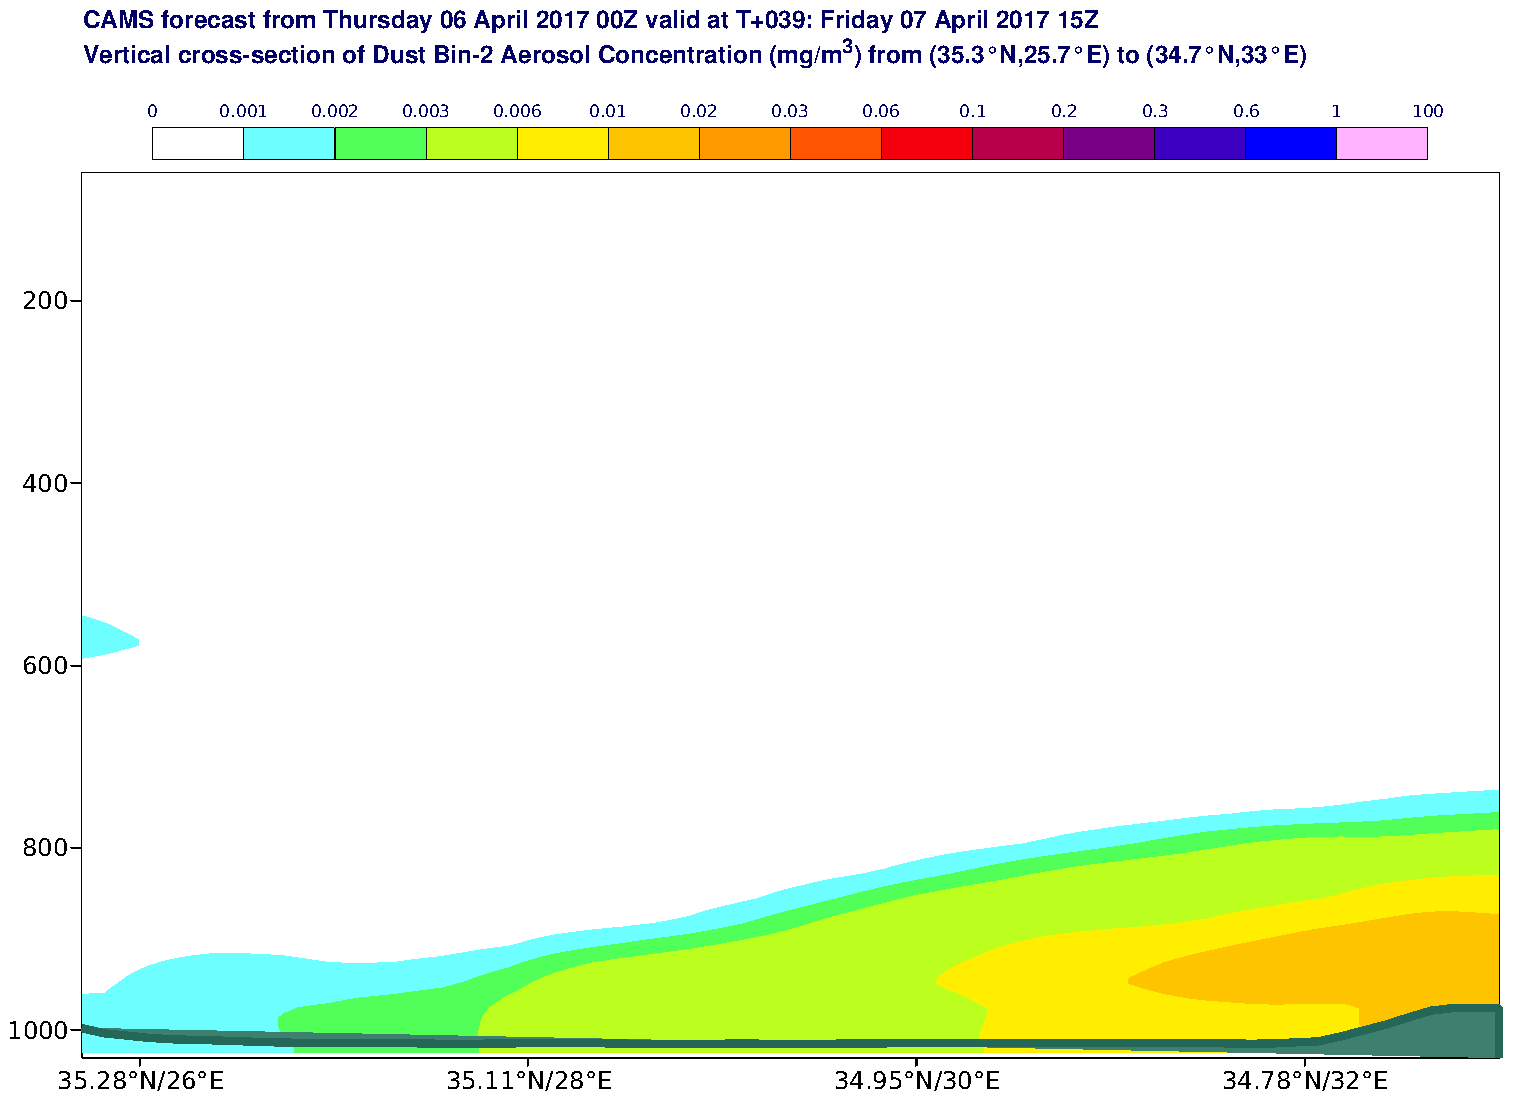 Vertical cross-section of Dust Bin-2 Aerosol Concentration (mg/m3) valid at T39 - 2017-04-07 15:00